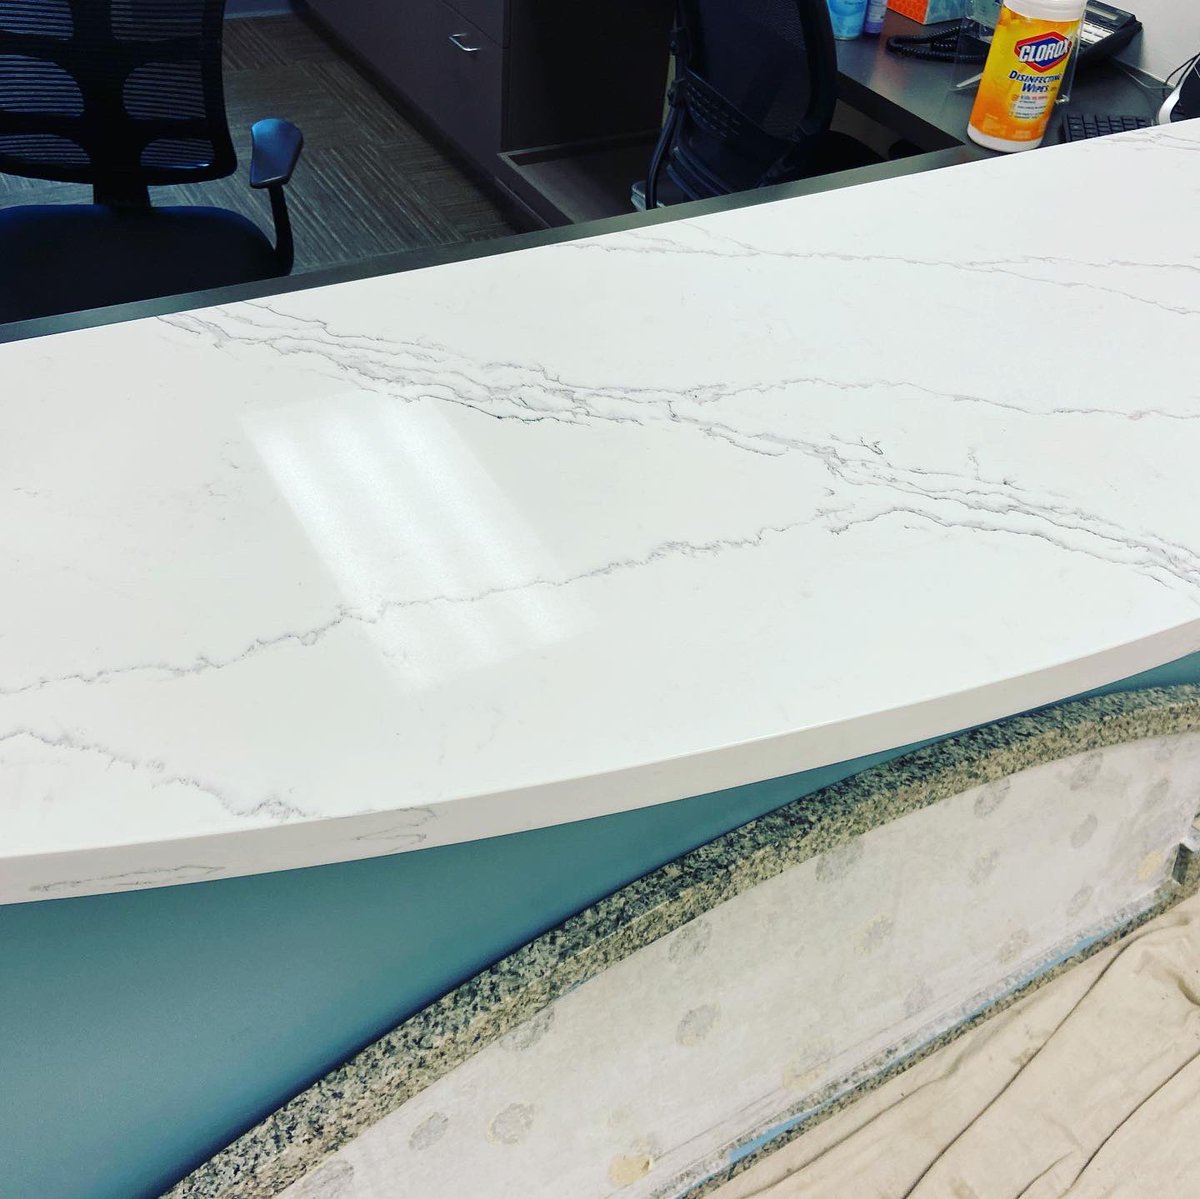 No slowdown over here. In fact we are hiring more people 

#generalcontractor #commercialconstruction  #quartzcountertops  #commercialcontractor #paintingcontractor